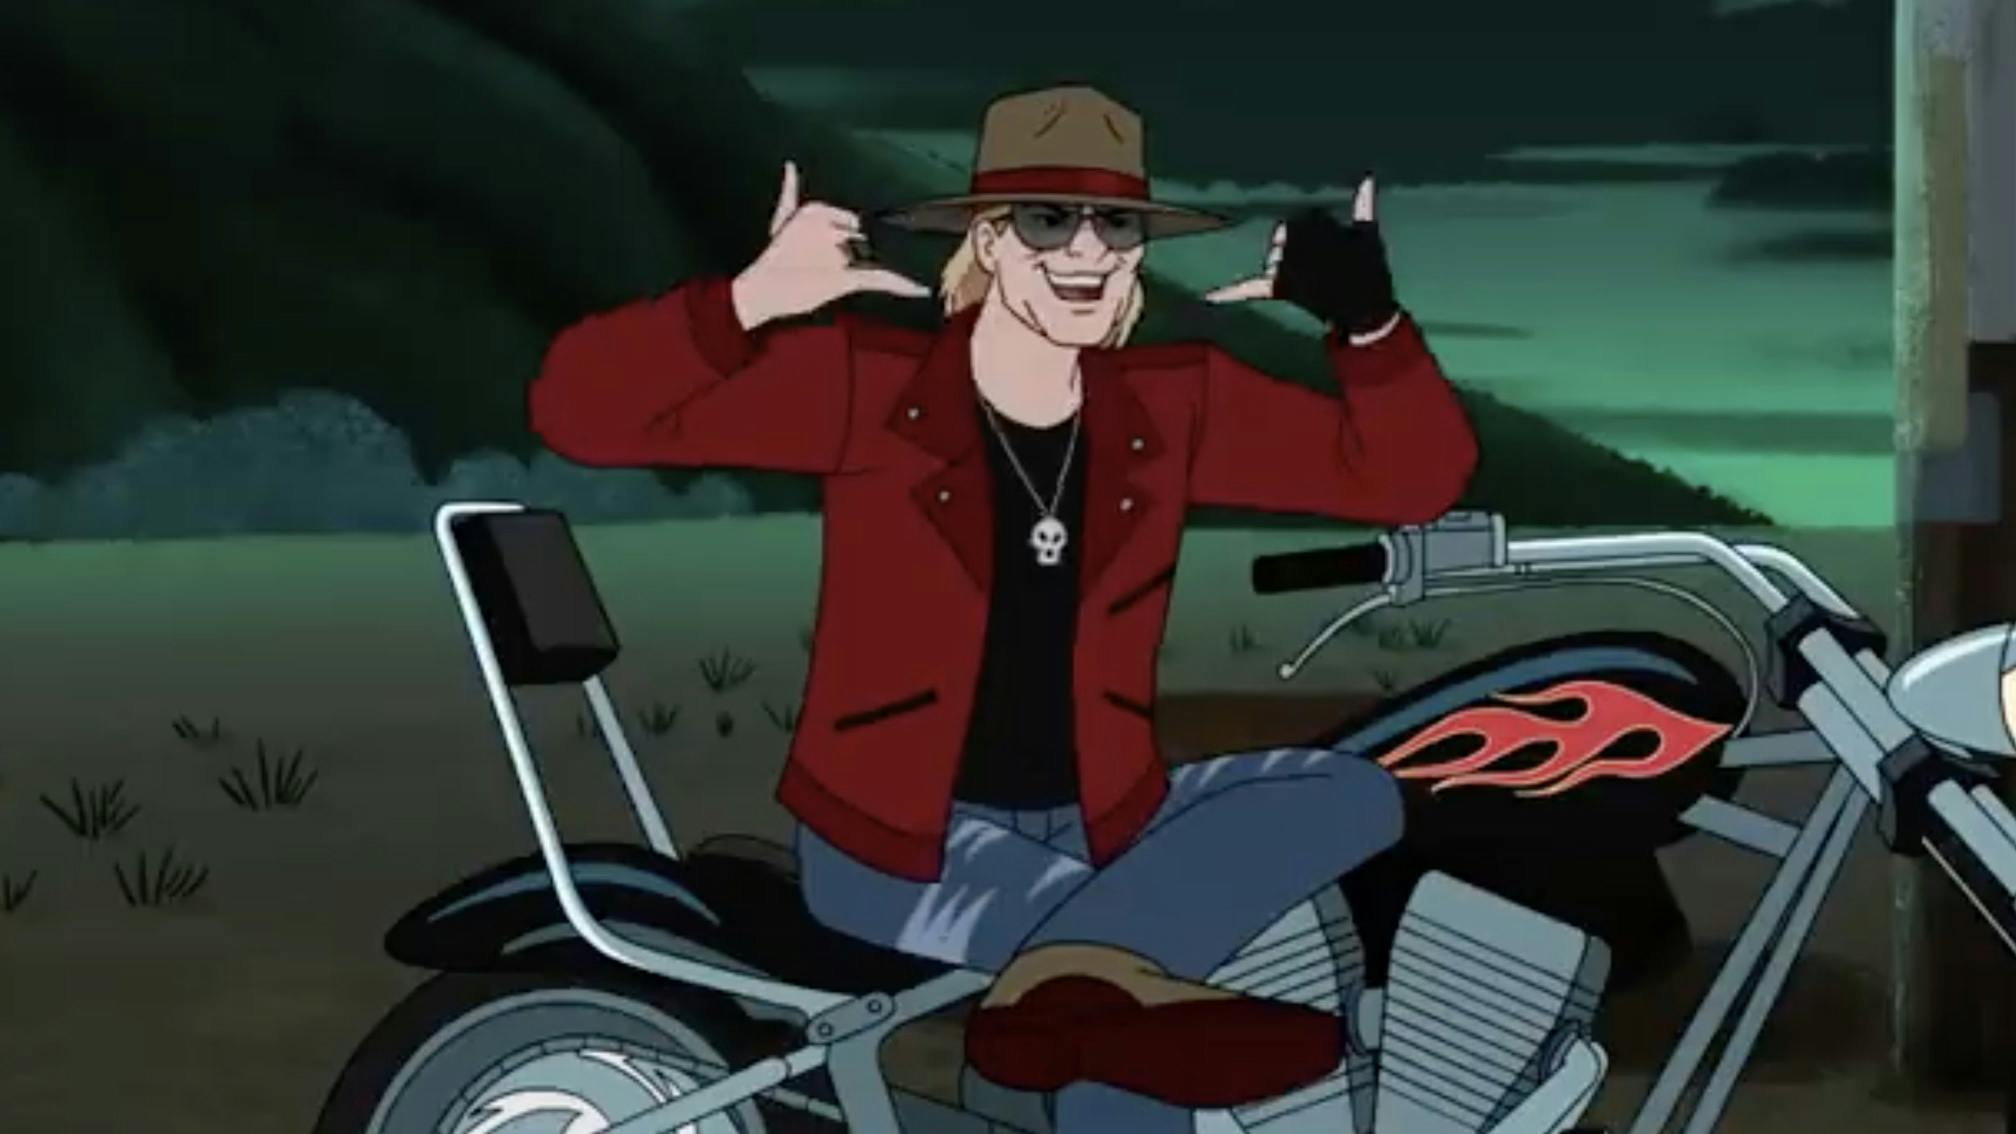 See Axl Rose make a cameo appearance on Scooby-Doo And Guess Who?